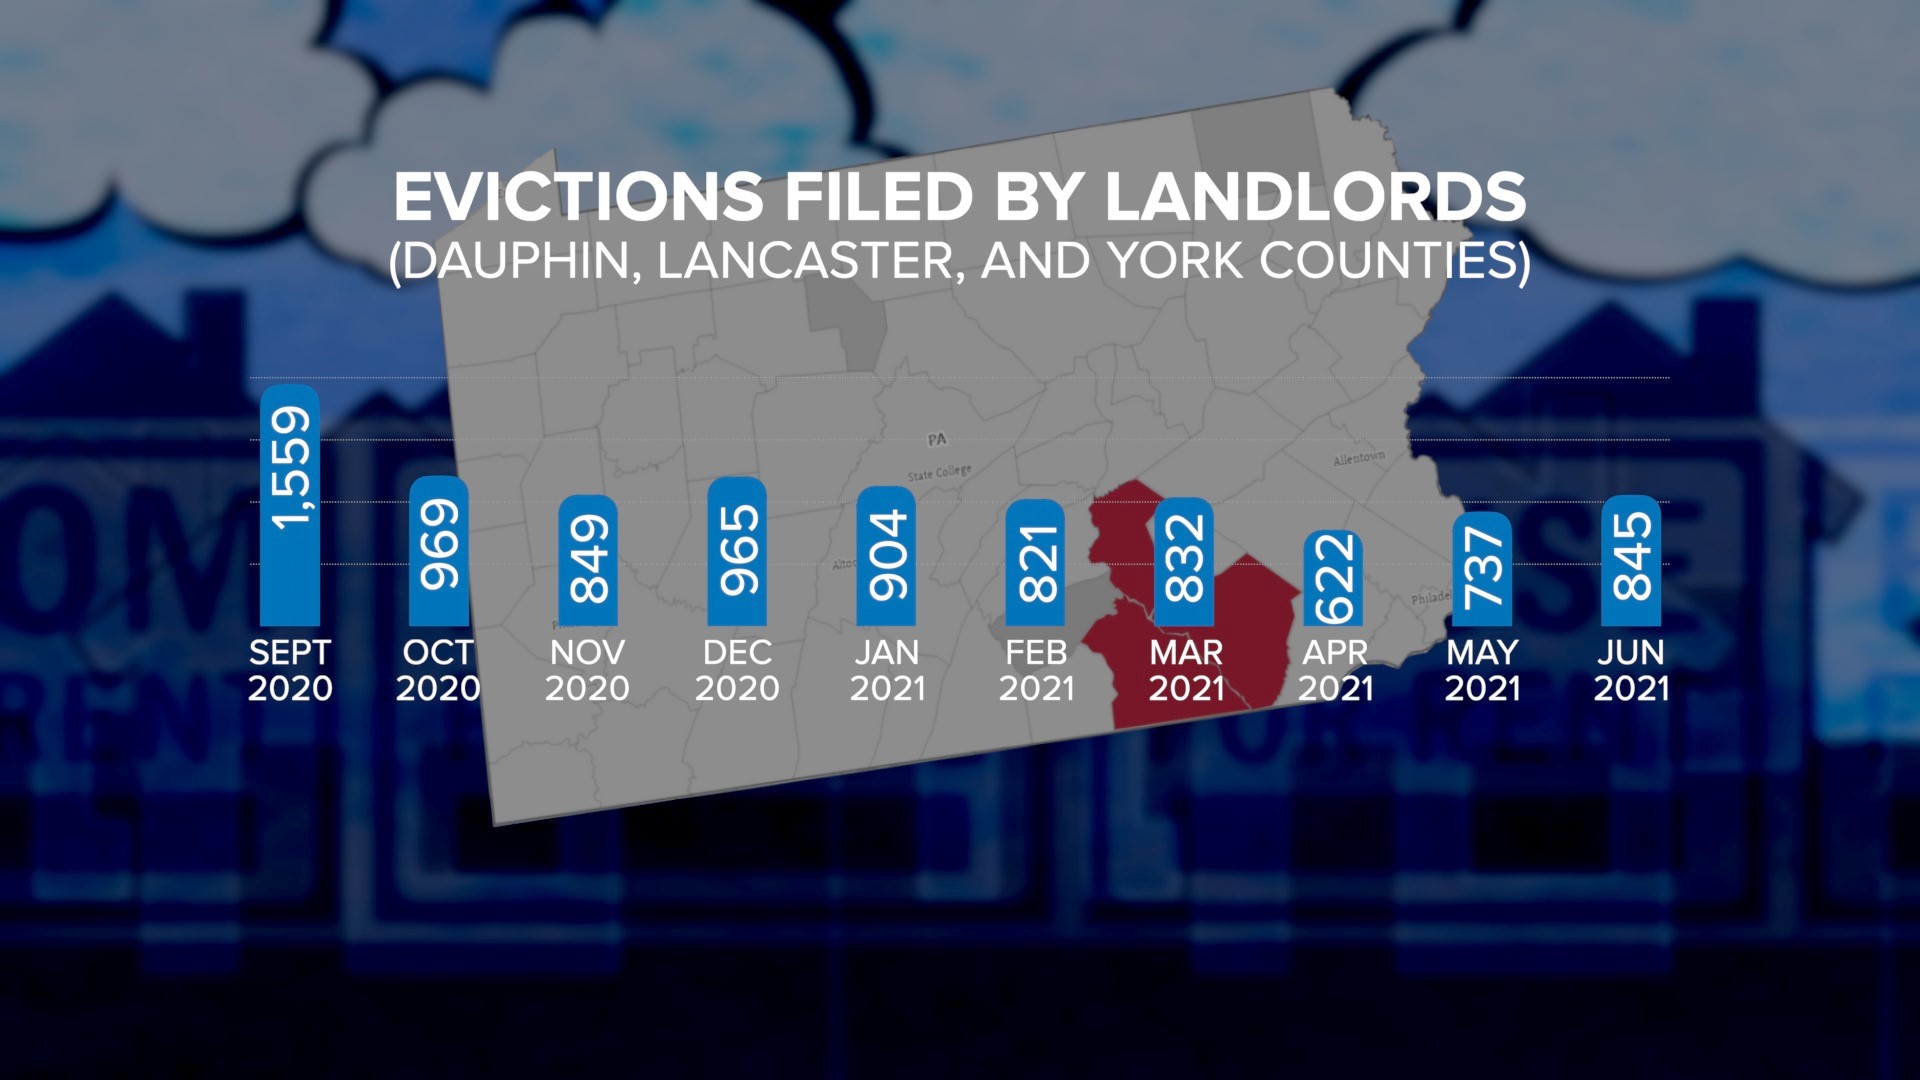 During the moratorium, landlords filed thousands of evictions against tenants who owed rent. However, those landlords may never see the money that they’re owed.